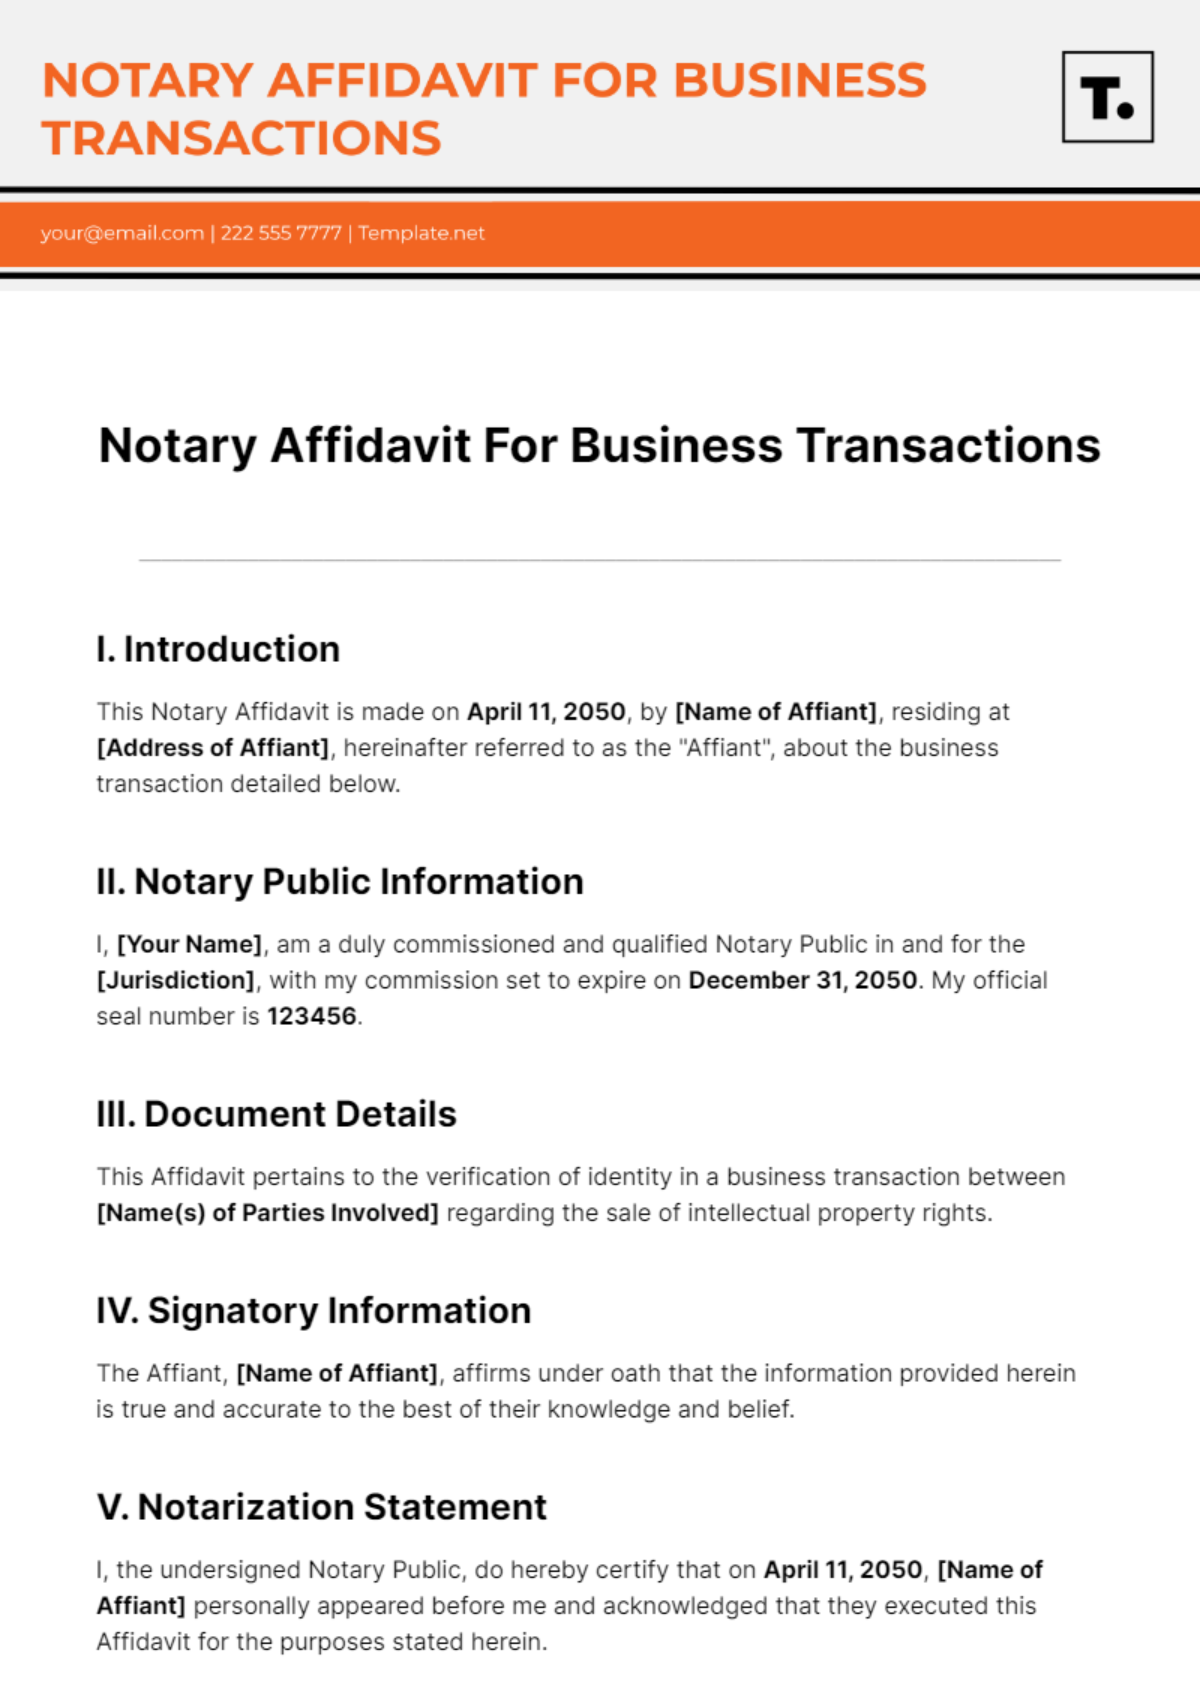 Free Notary Affidavit For Business Transactions Template